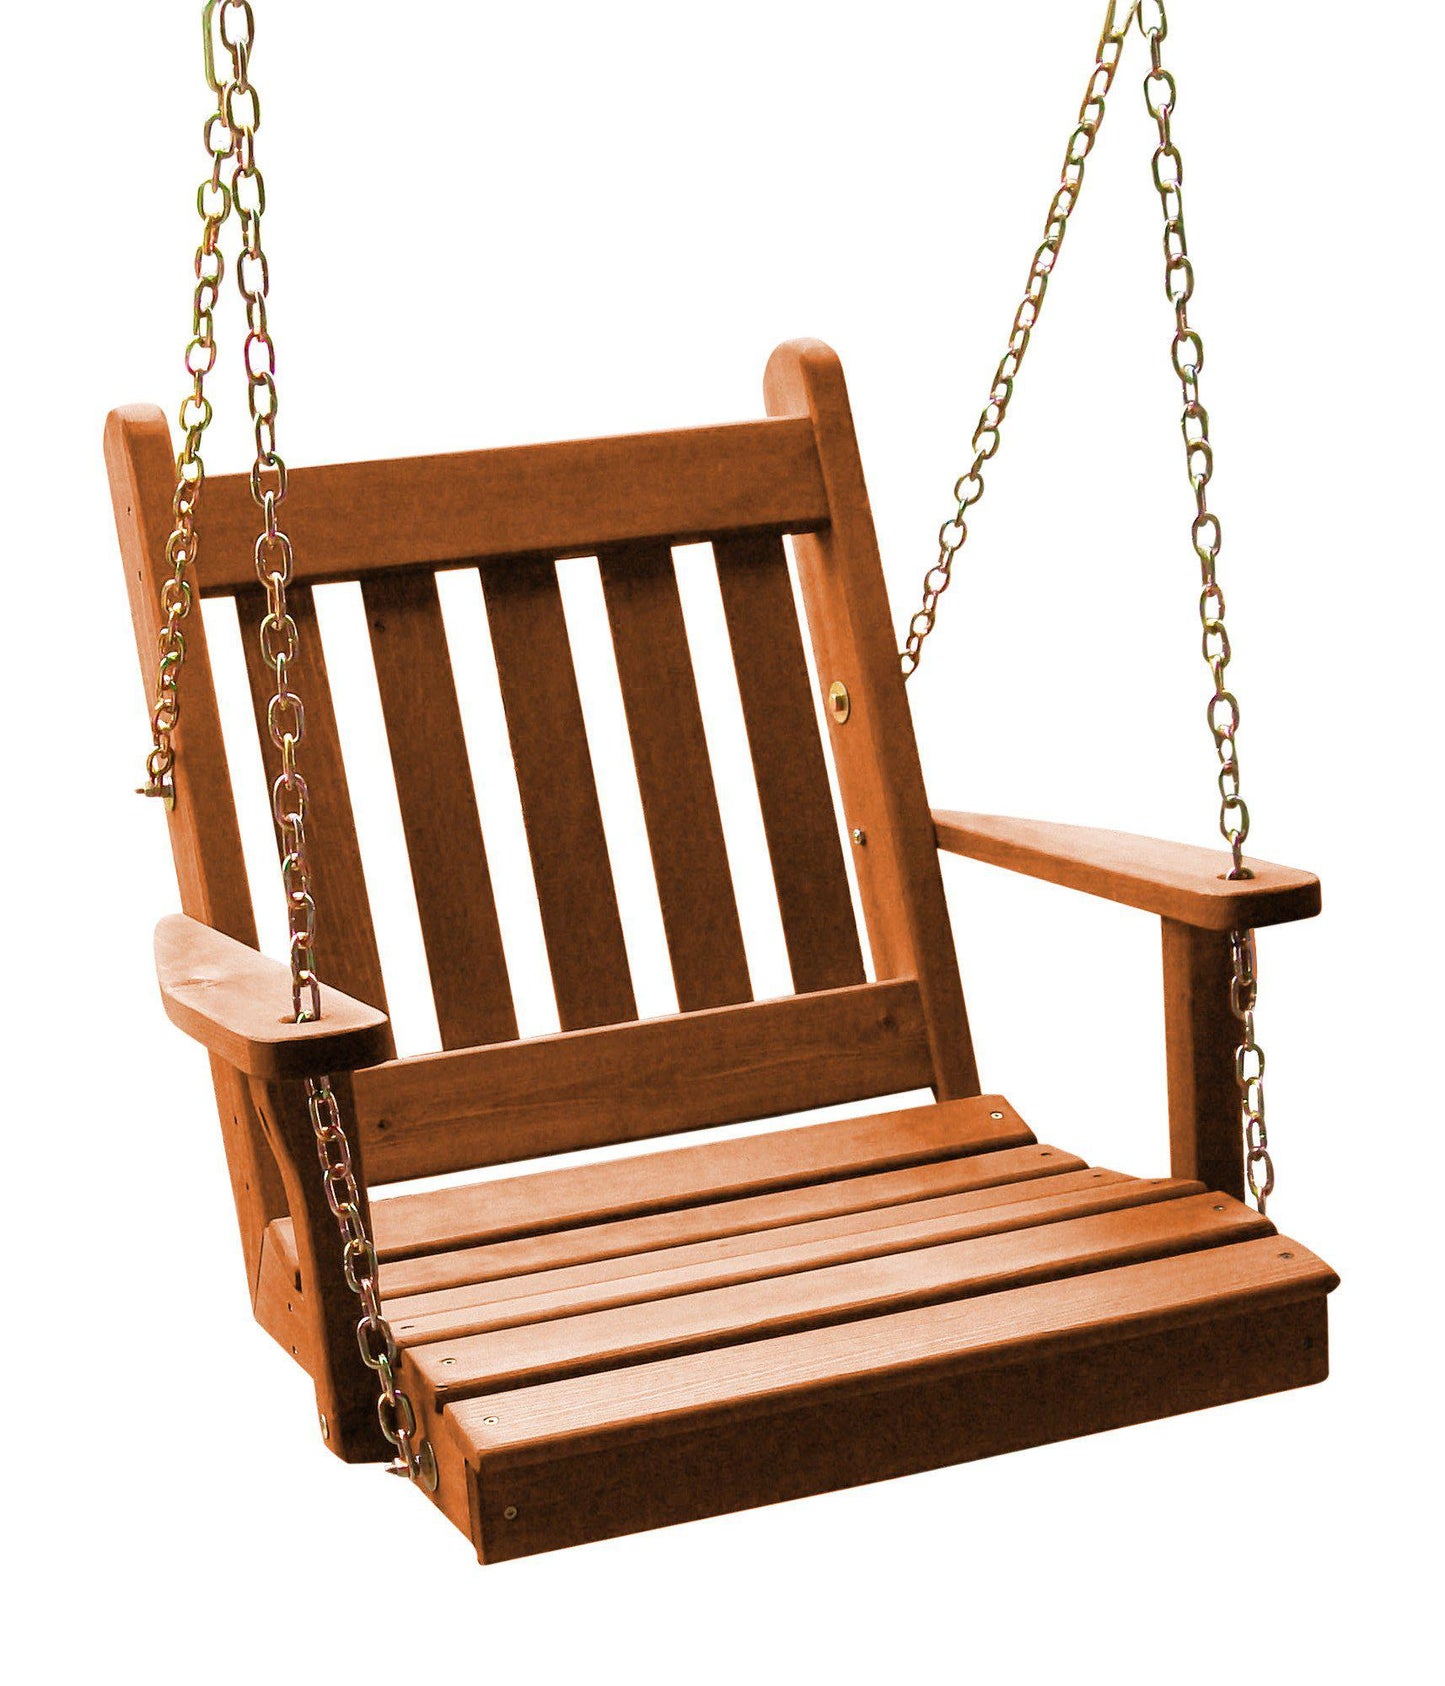 A&L FURNITURE CO. Western Red Cedar 2' Traditional English Single Chair Swing - LEAD TIME TO SHIP 4 WEEKS OR LESS